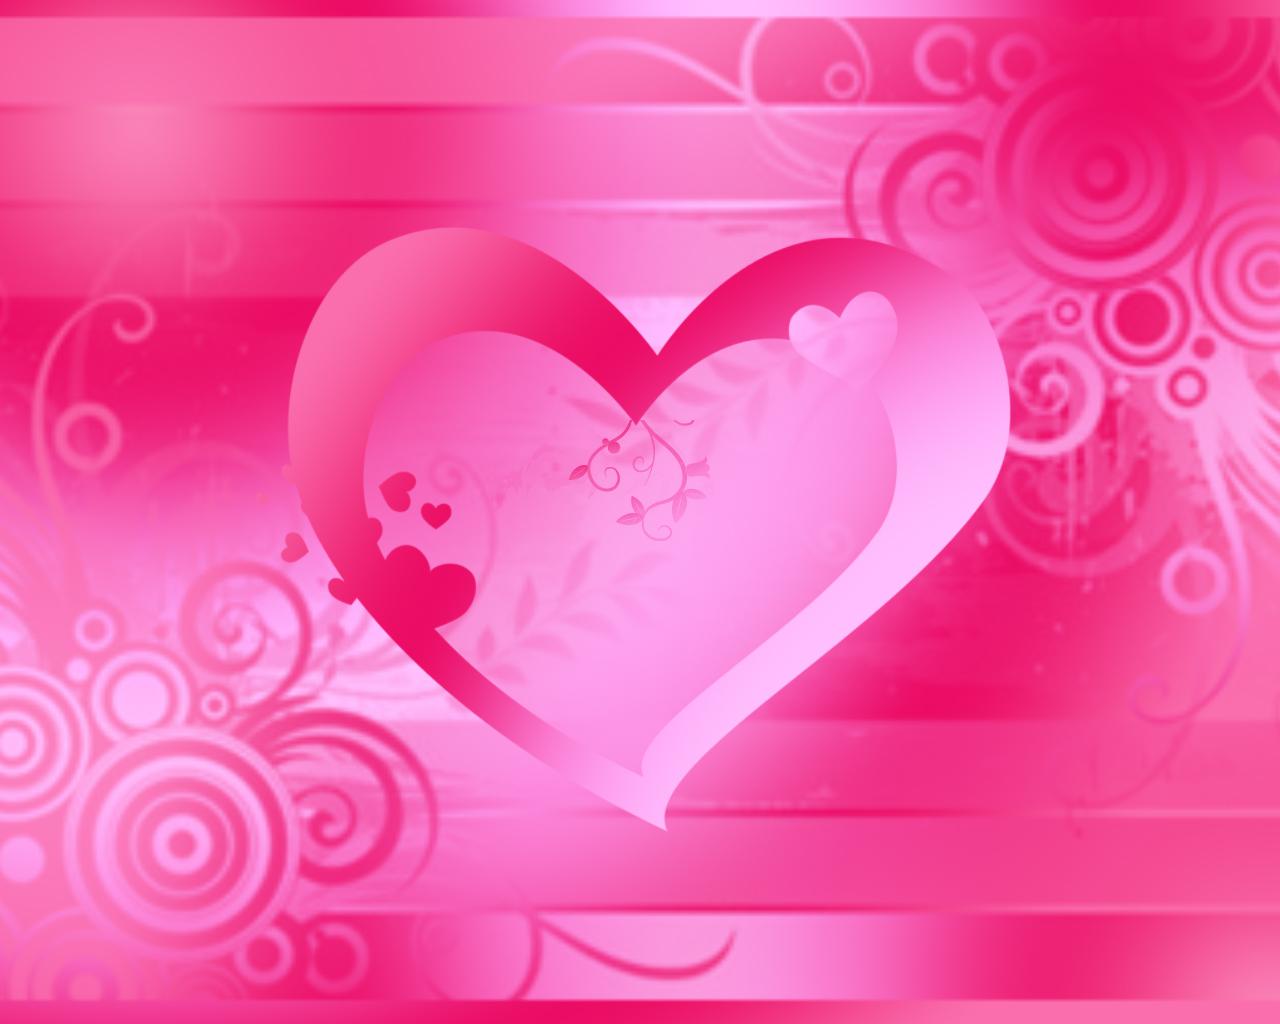 lucent hearts backround